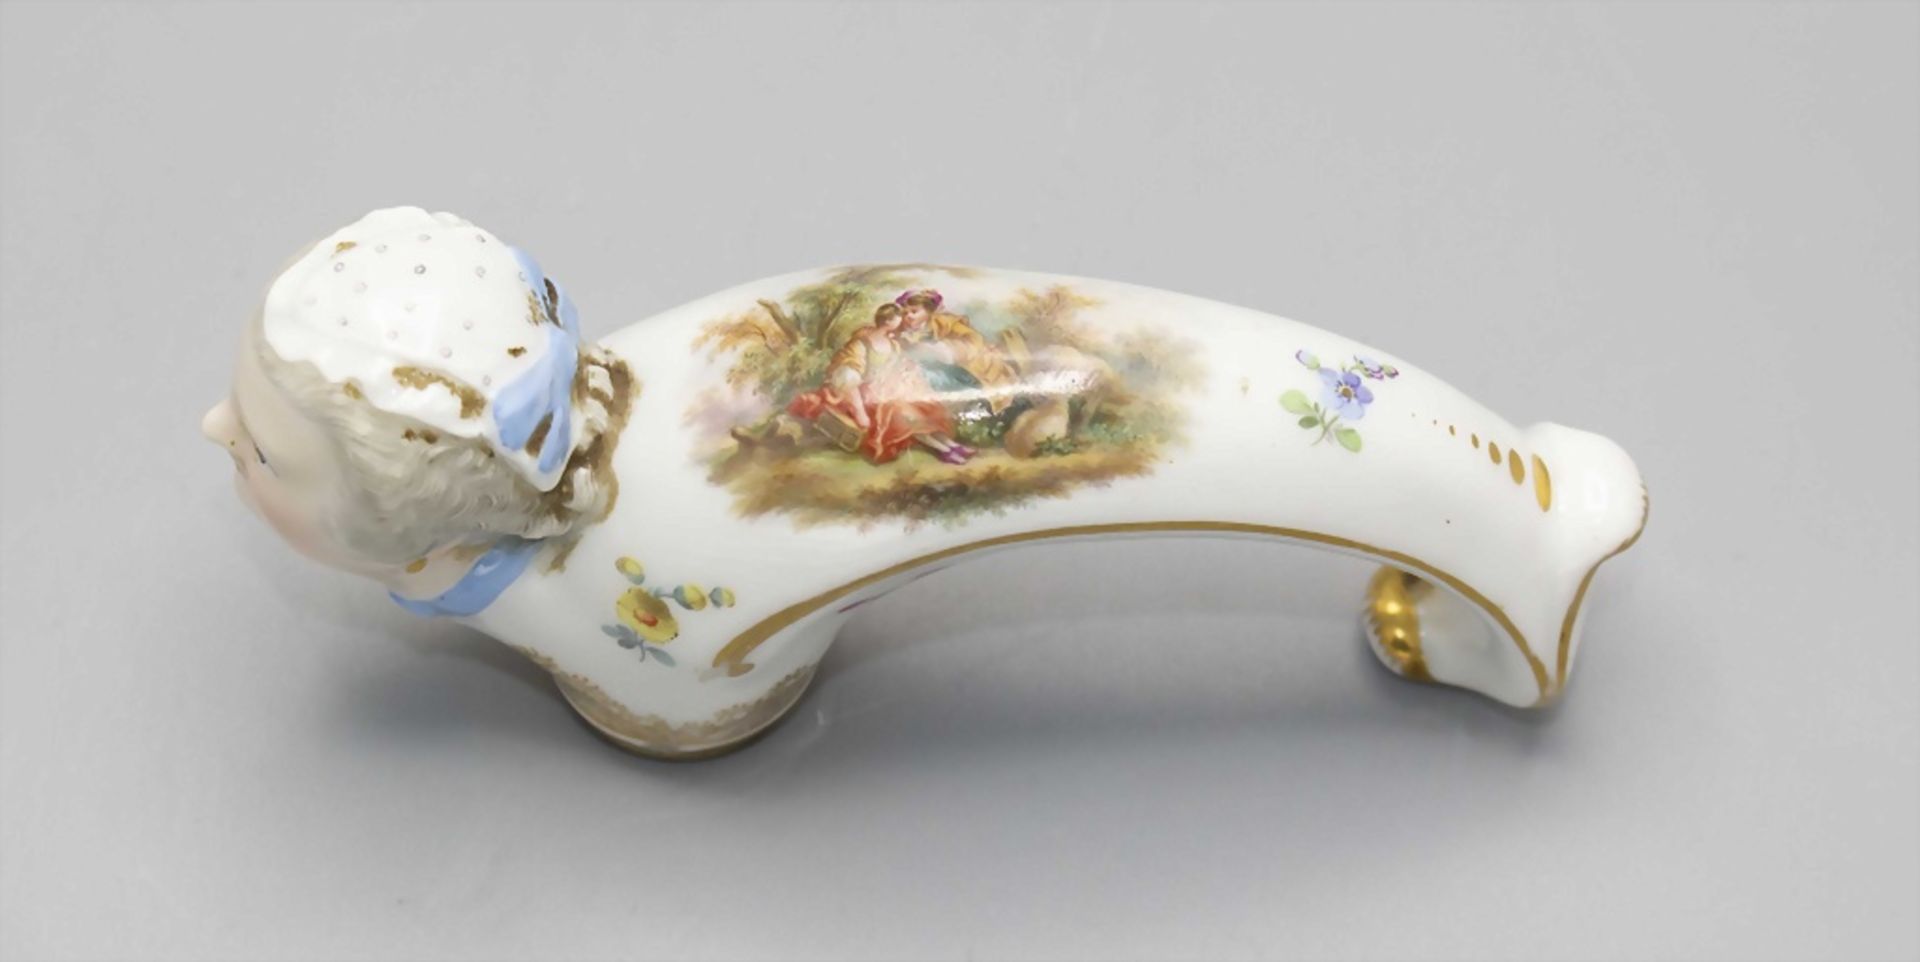 Stockgriff mit Frauenkopf und Watteau-Szene / A cane handle with the head of a woman and a ... - Bild 6 aus 6